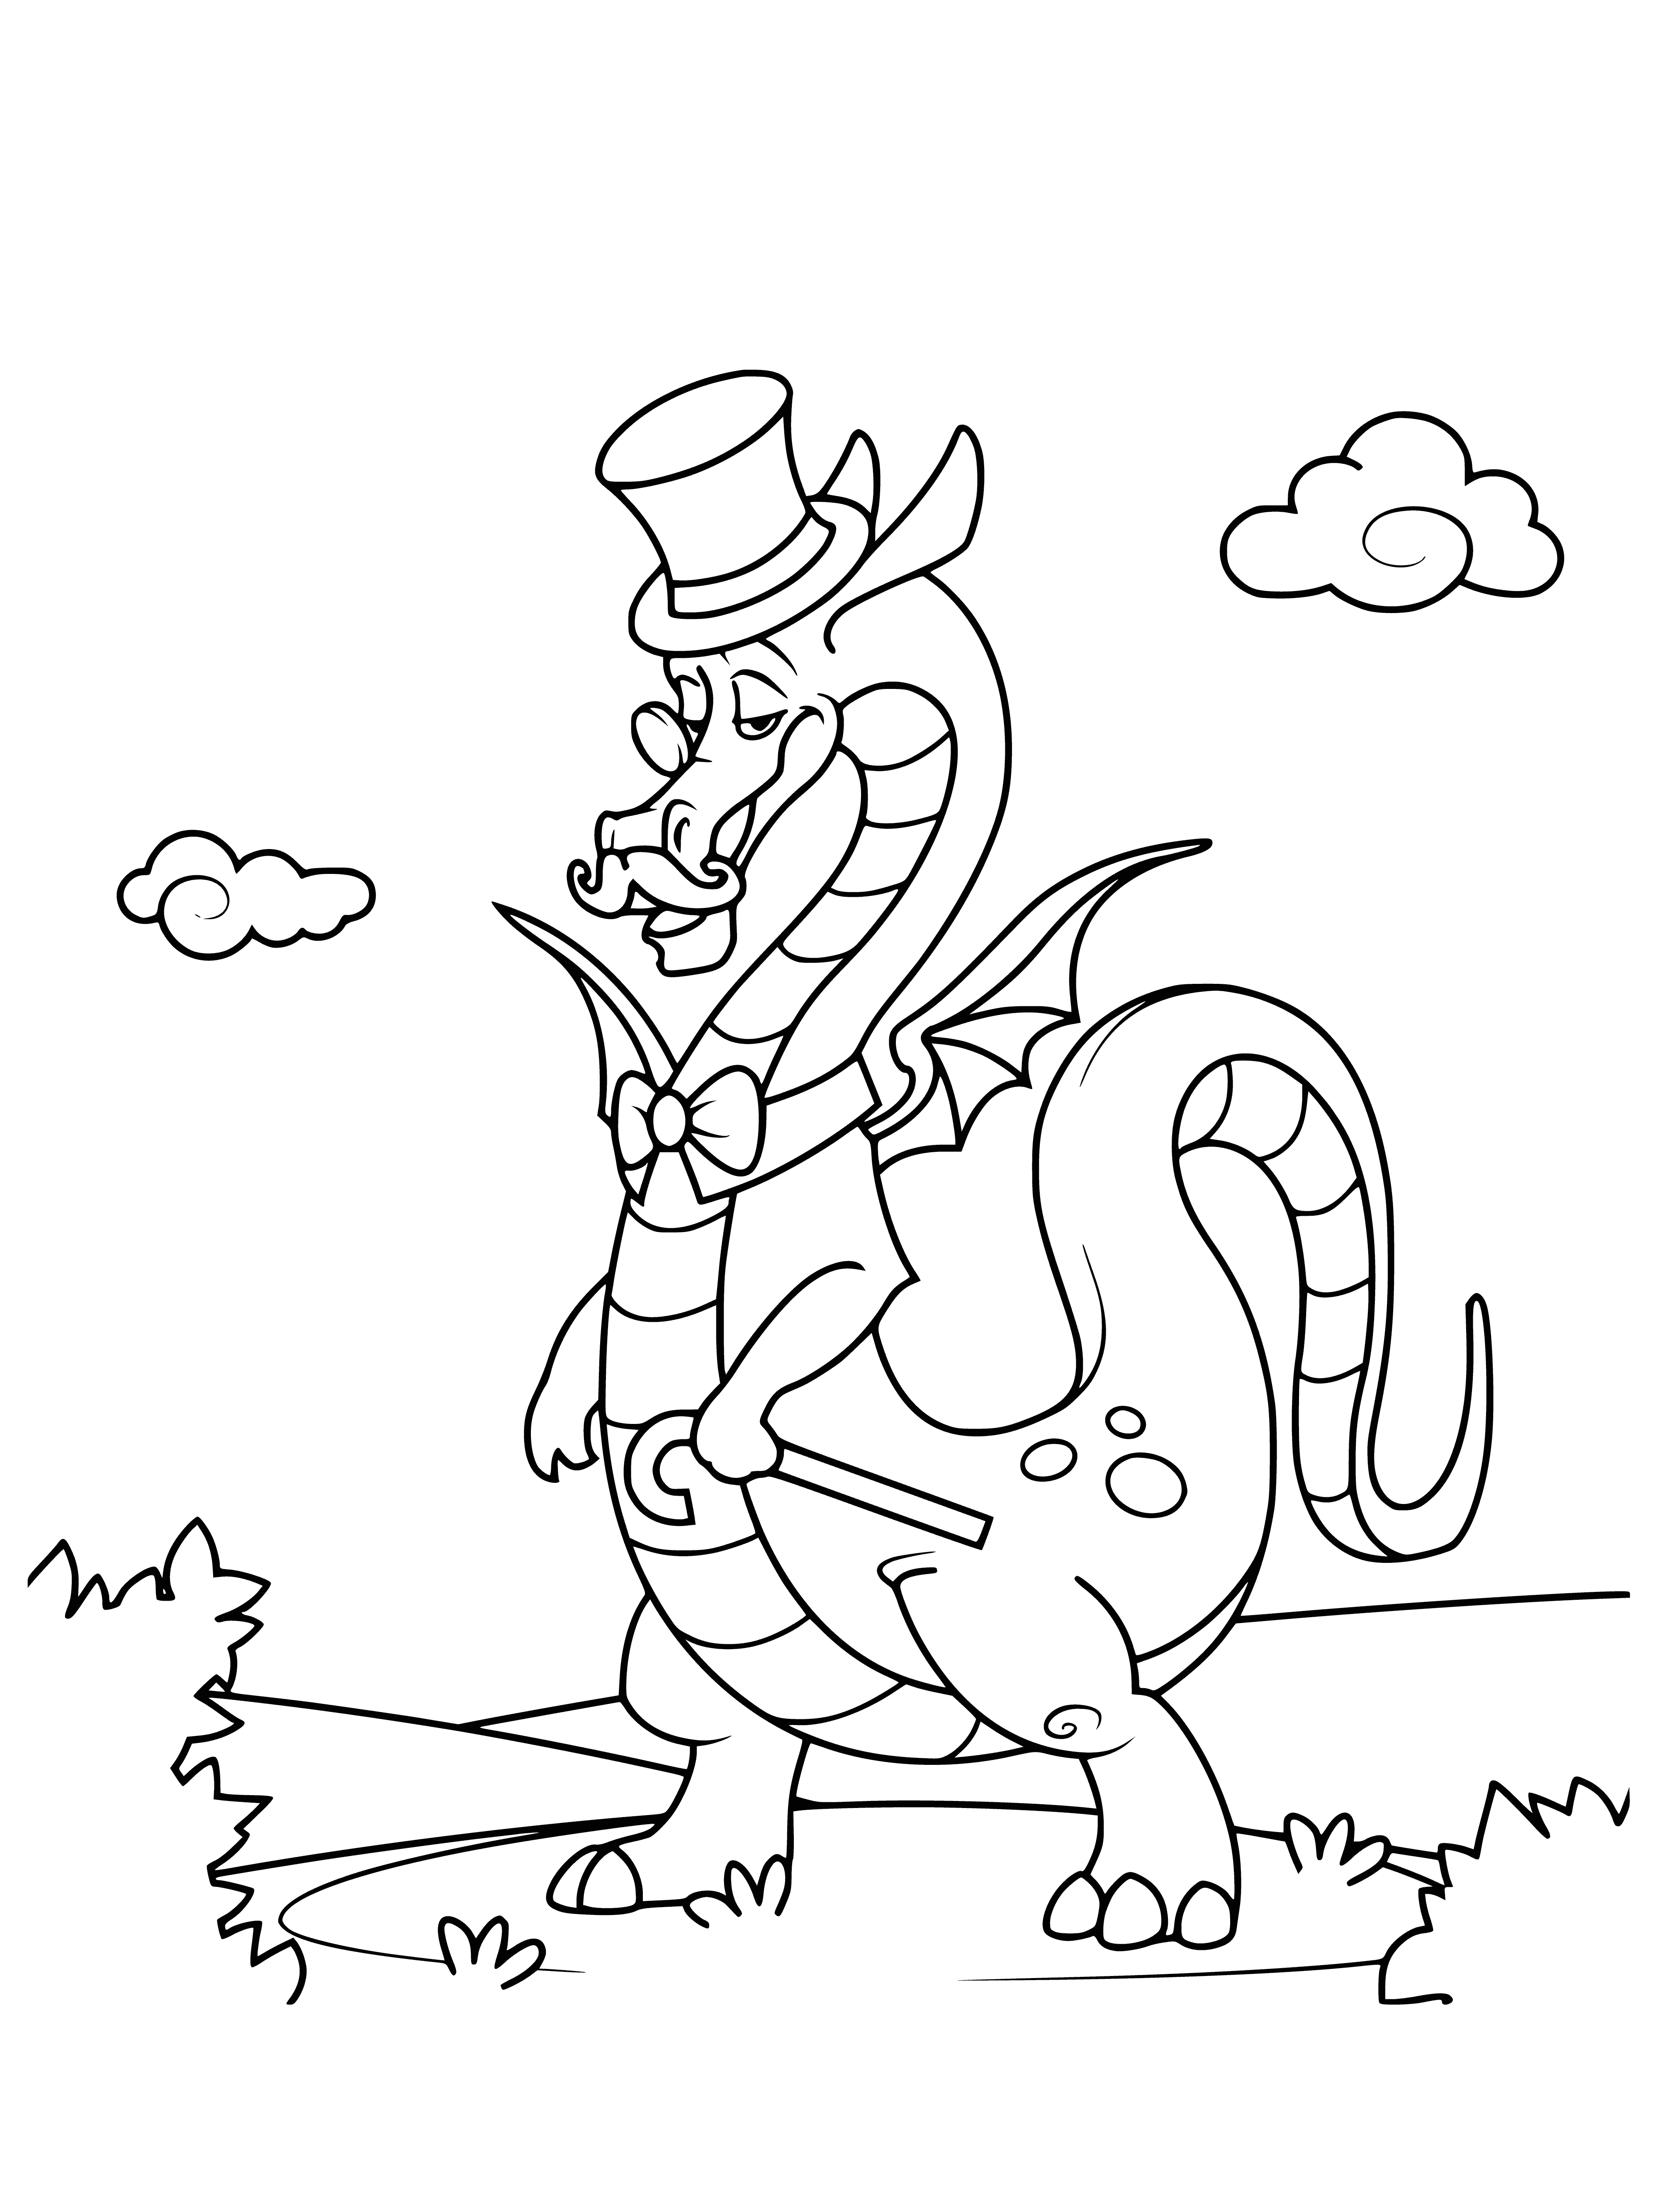 coloring page: Large scaly creature with long neck, tail, wings and fire breath: a dragon!